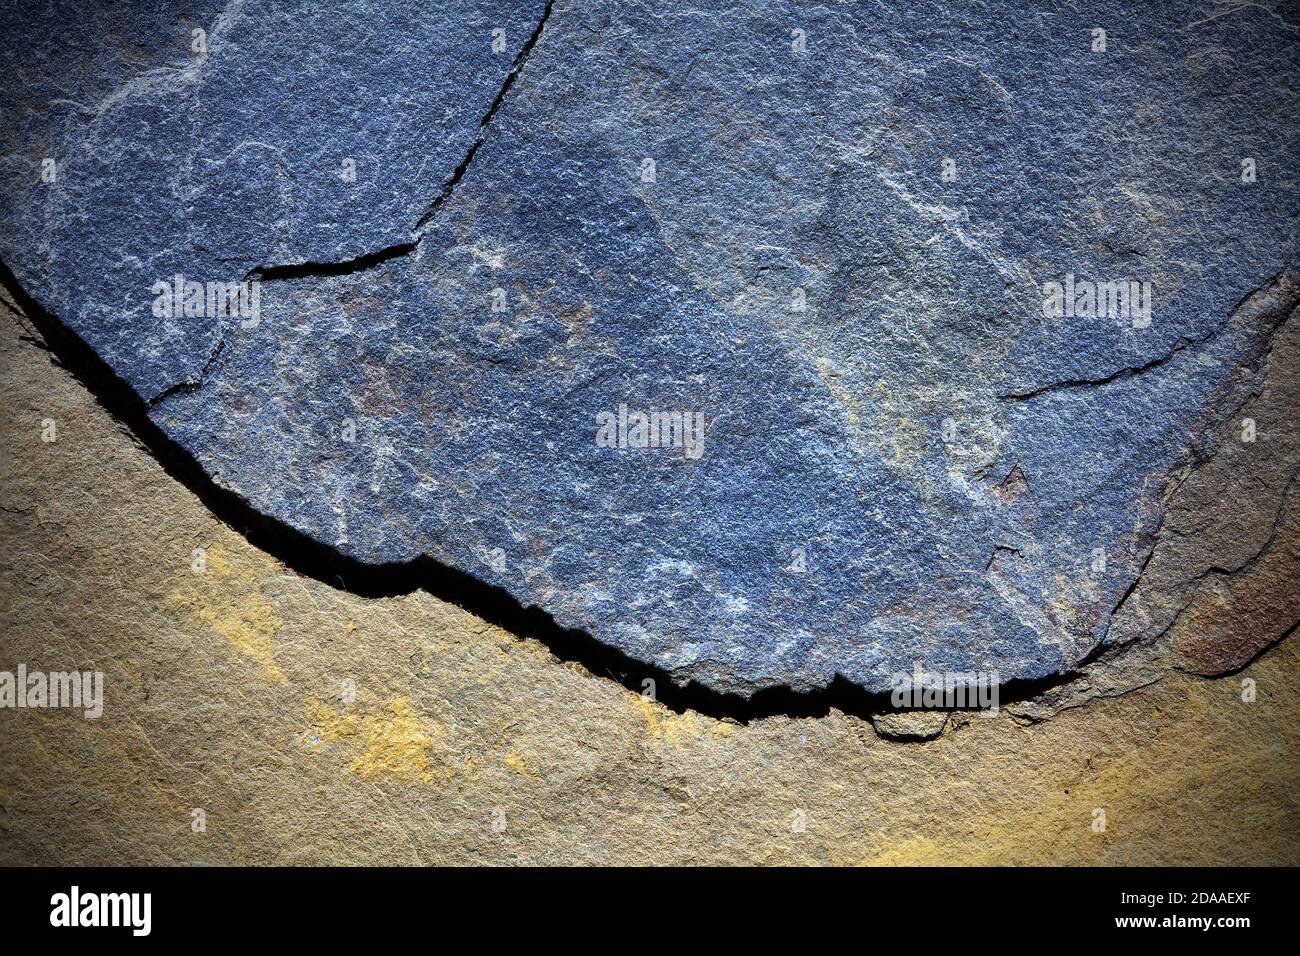 Rough texture grey stone background detail close up Stock Photo